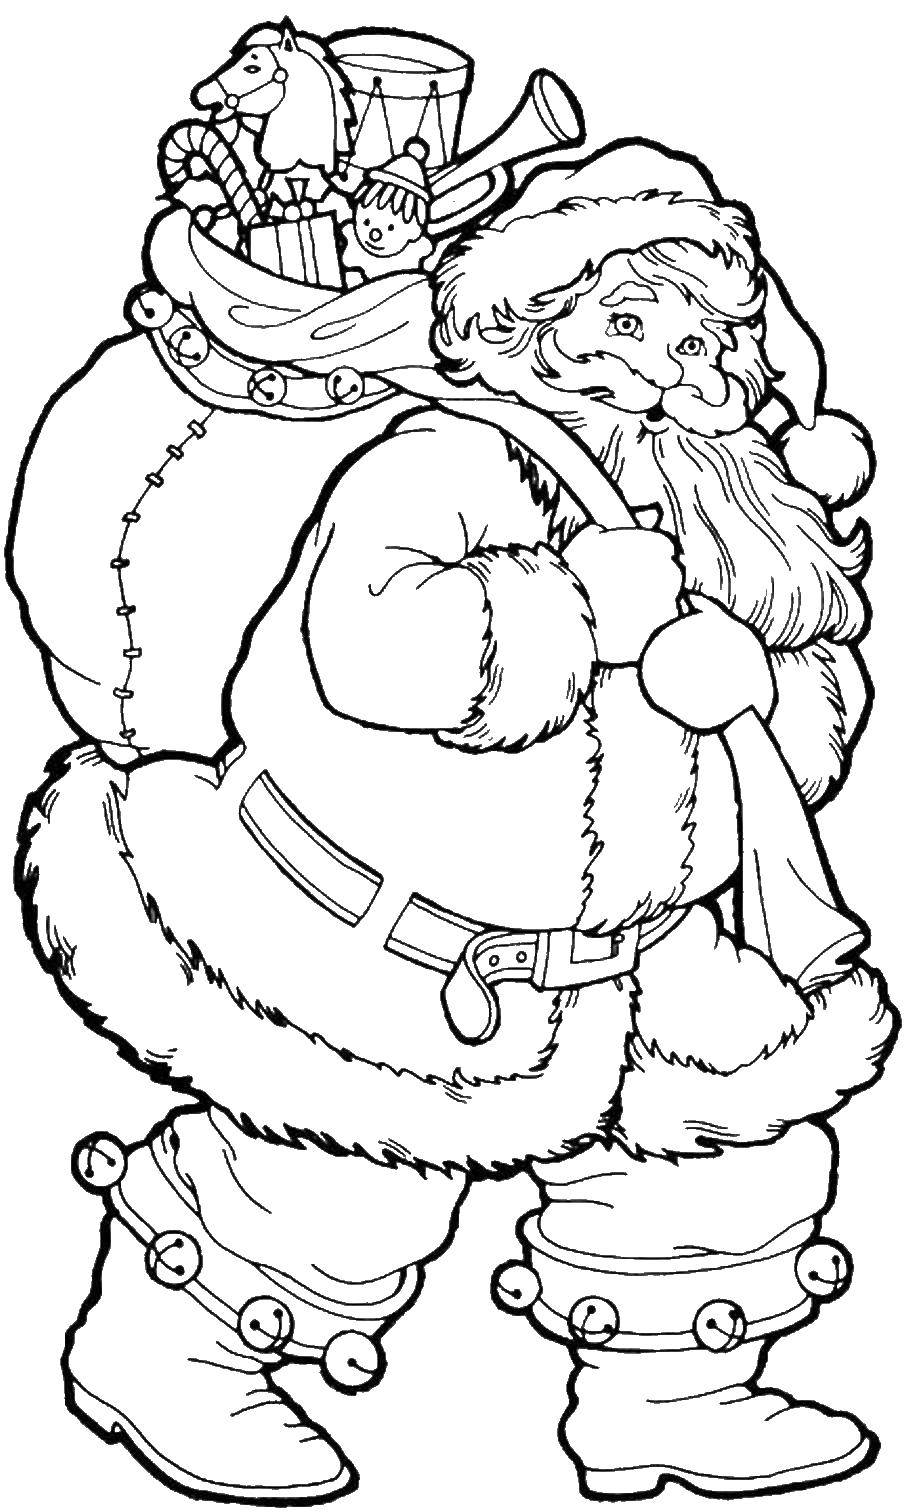 Coloring Father morosos with gifts. Category Christmas. Tags:  Santa Claus, bag toys.